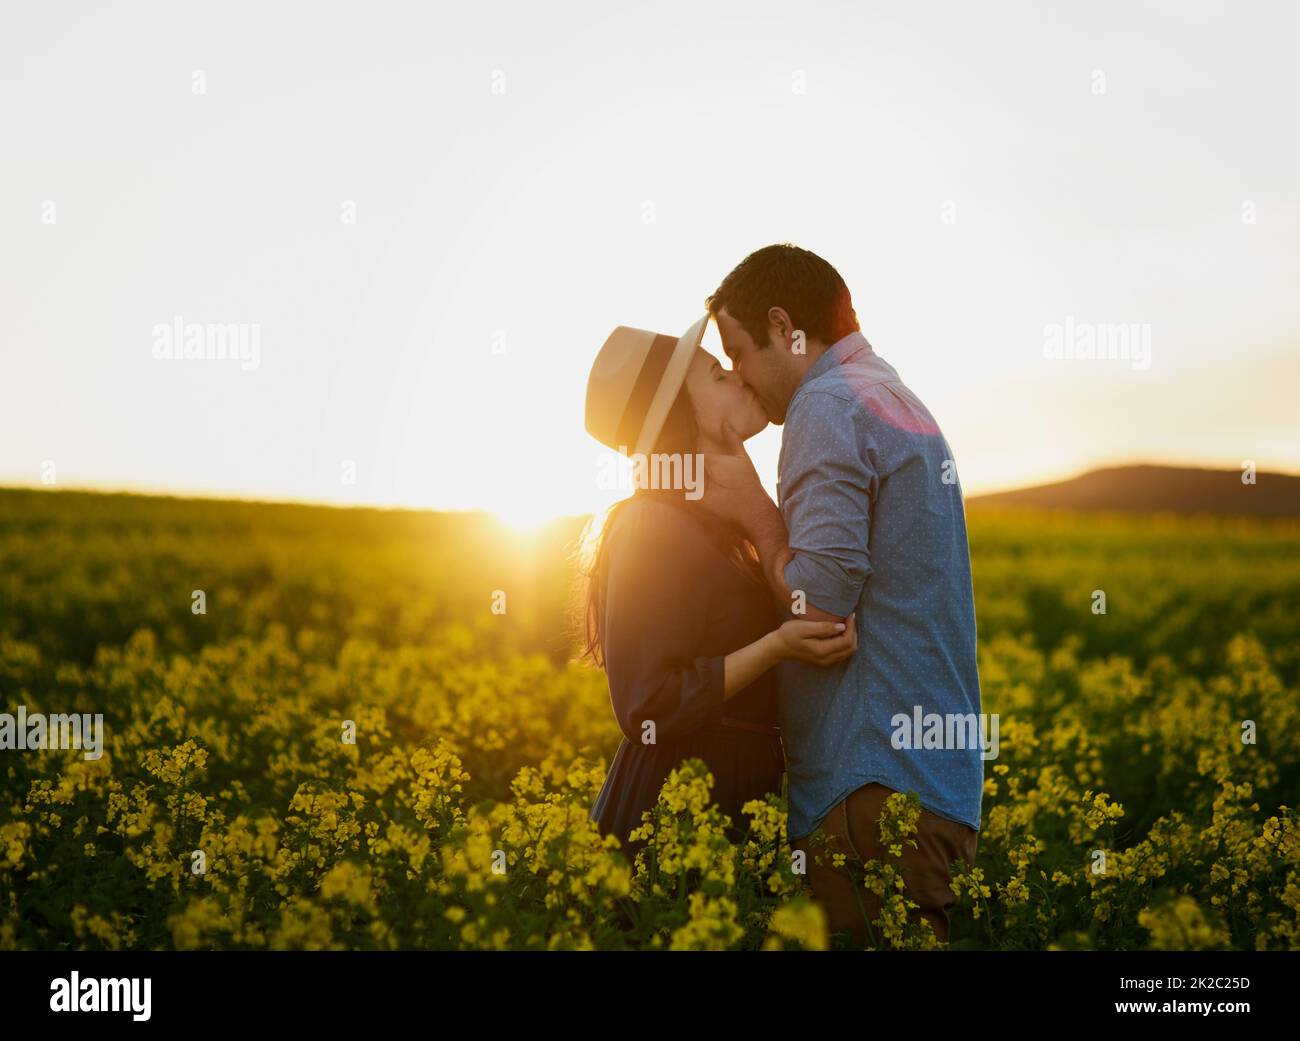 Sharing a magical moment together. Shot of an affectionate young couple sharing a kiss at sunset. Stock Photo